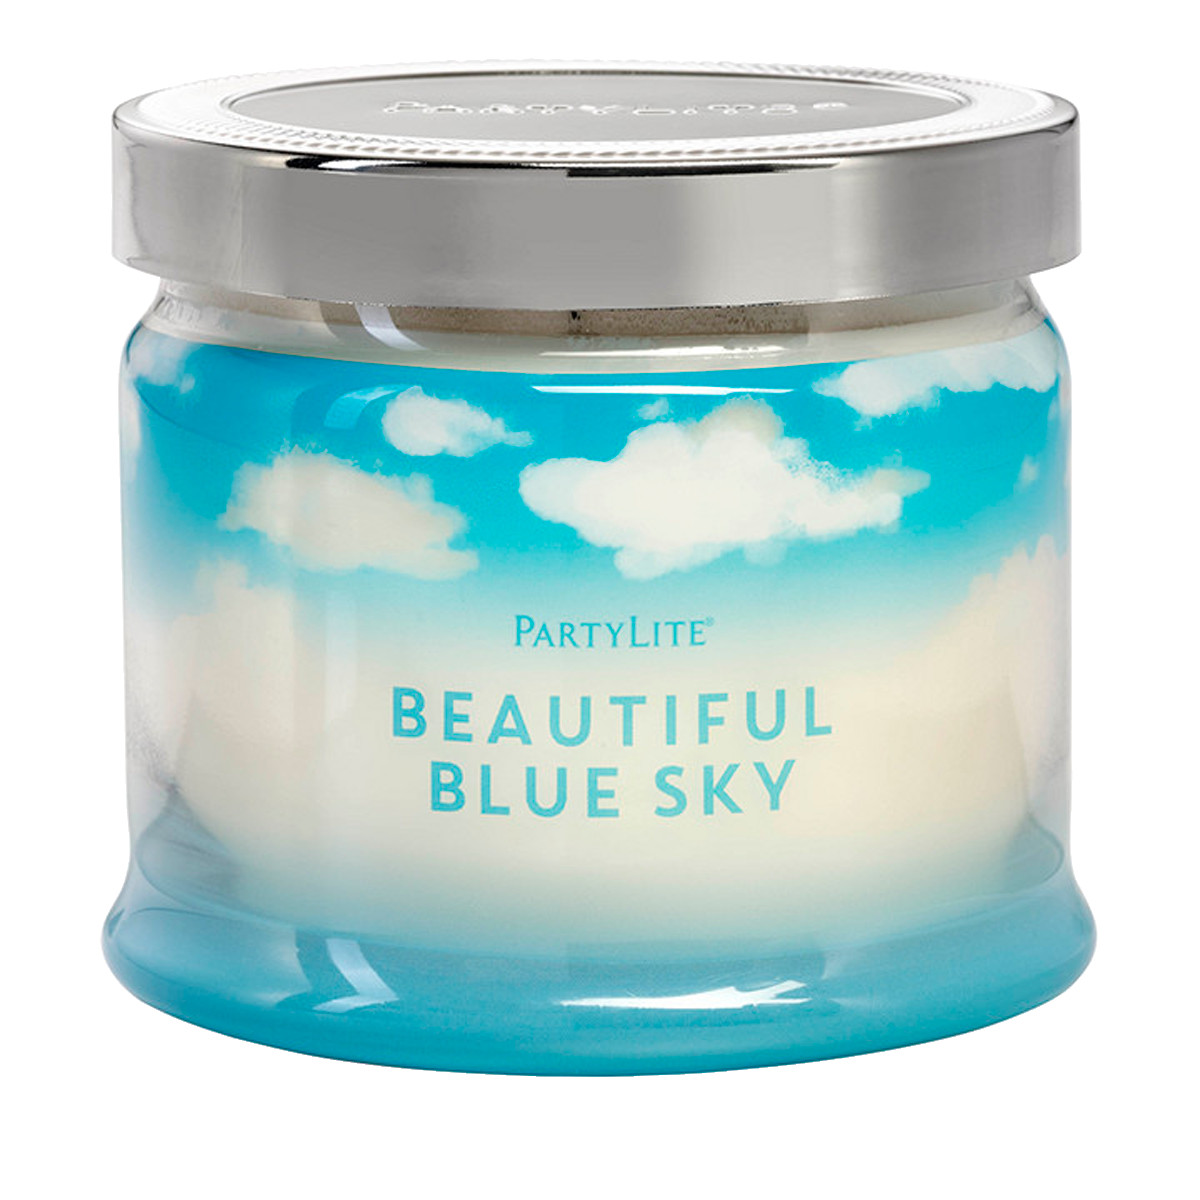 26 Recommended Partylite Hurricane Vase 2022 free download partylite hurricane vase of beautiful blue sky 3 wick jar candle in fh18 g73c1014